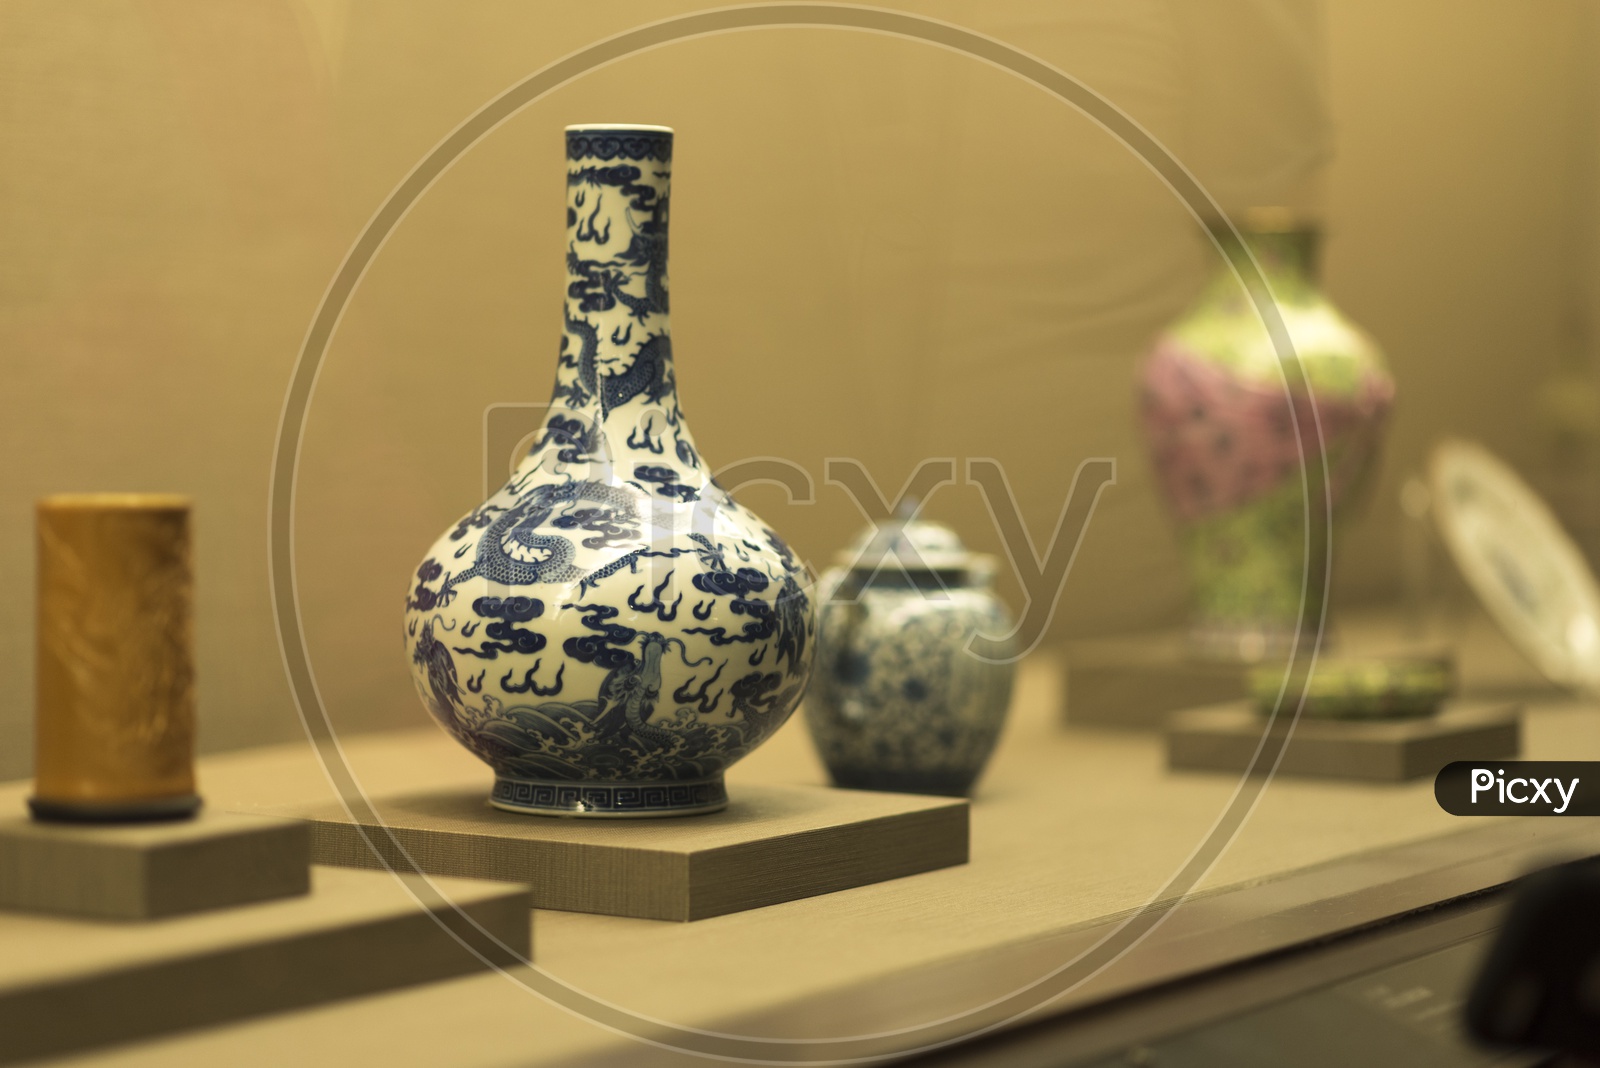 Antique Vase  In Display At  Taipei's National Palace Museum